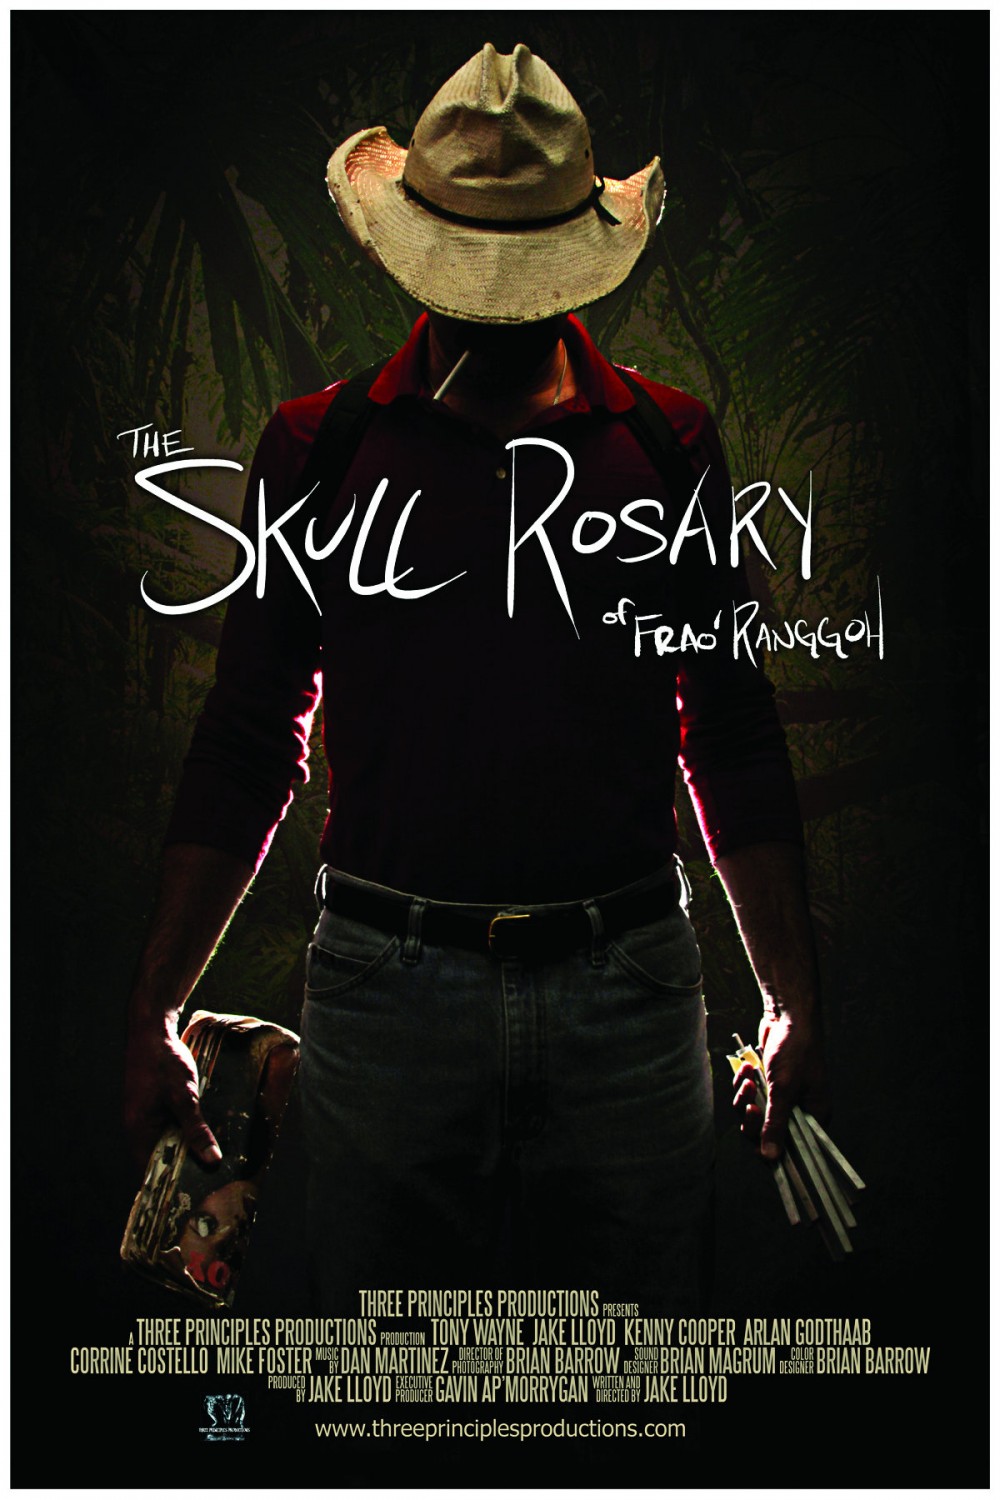 Extra Large Movie Poster Image for The Skull Rosary of Frao' Ranggoh